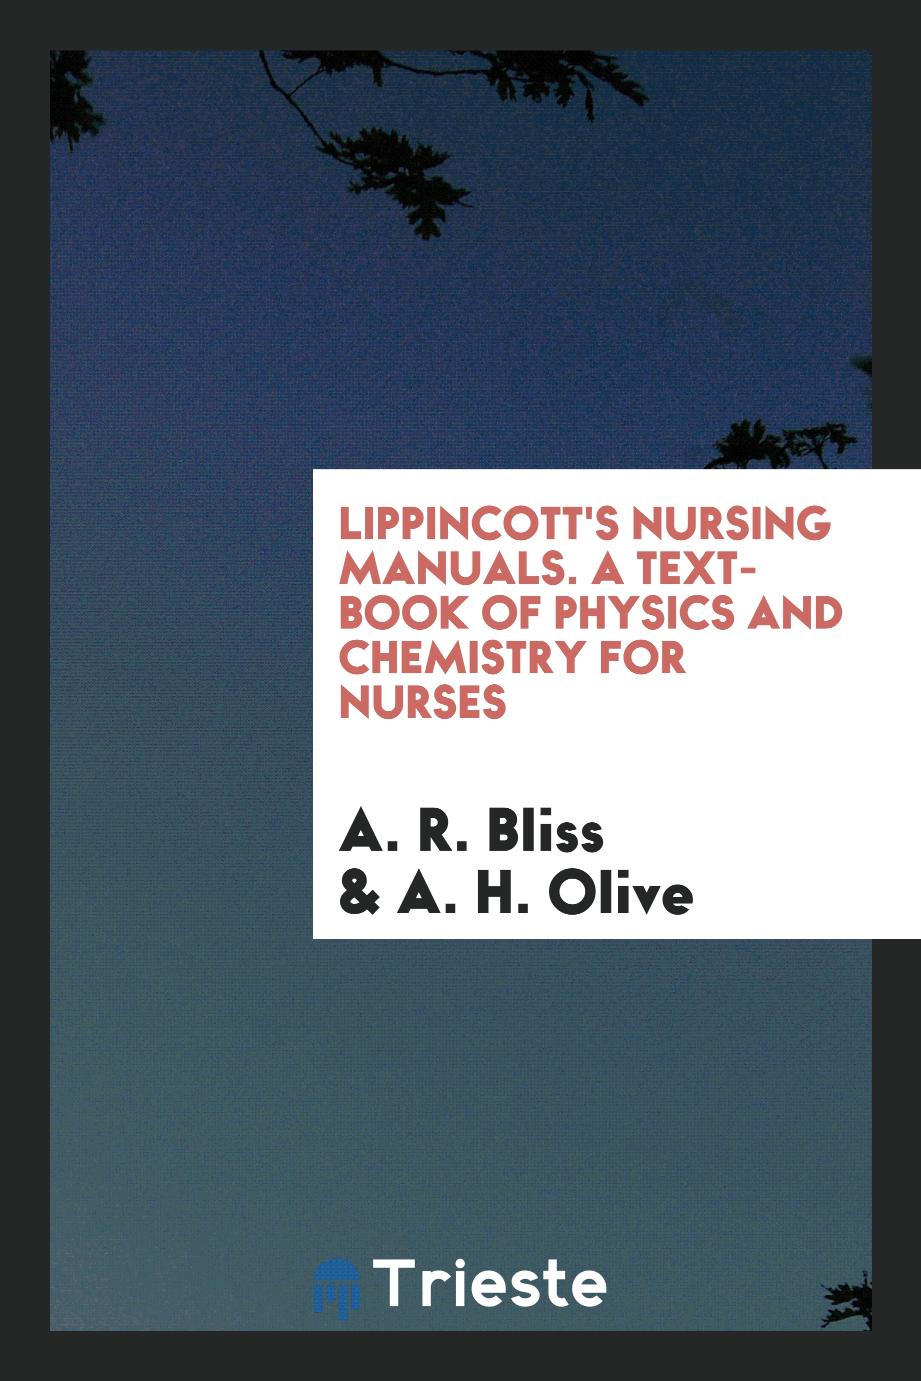 Lippincott's Nursing Manuals. A Text-Book of Physics and Chemistry for Nurses